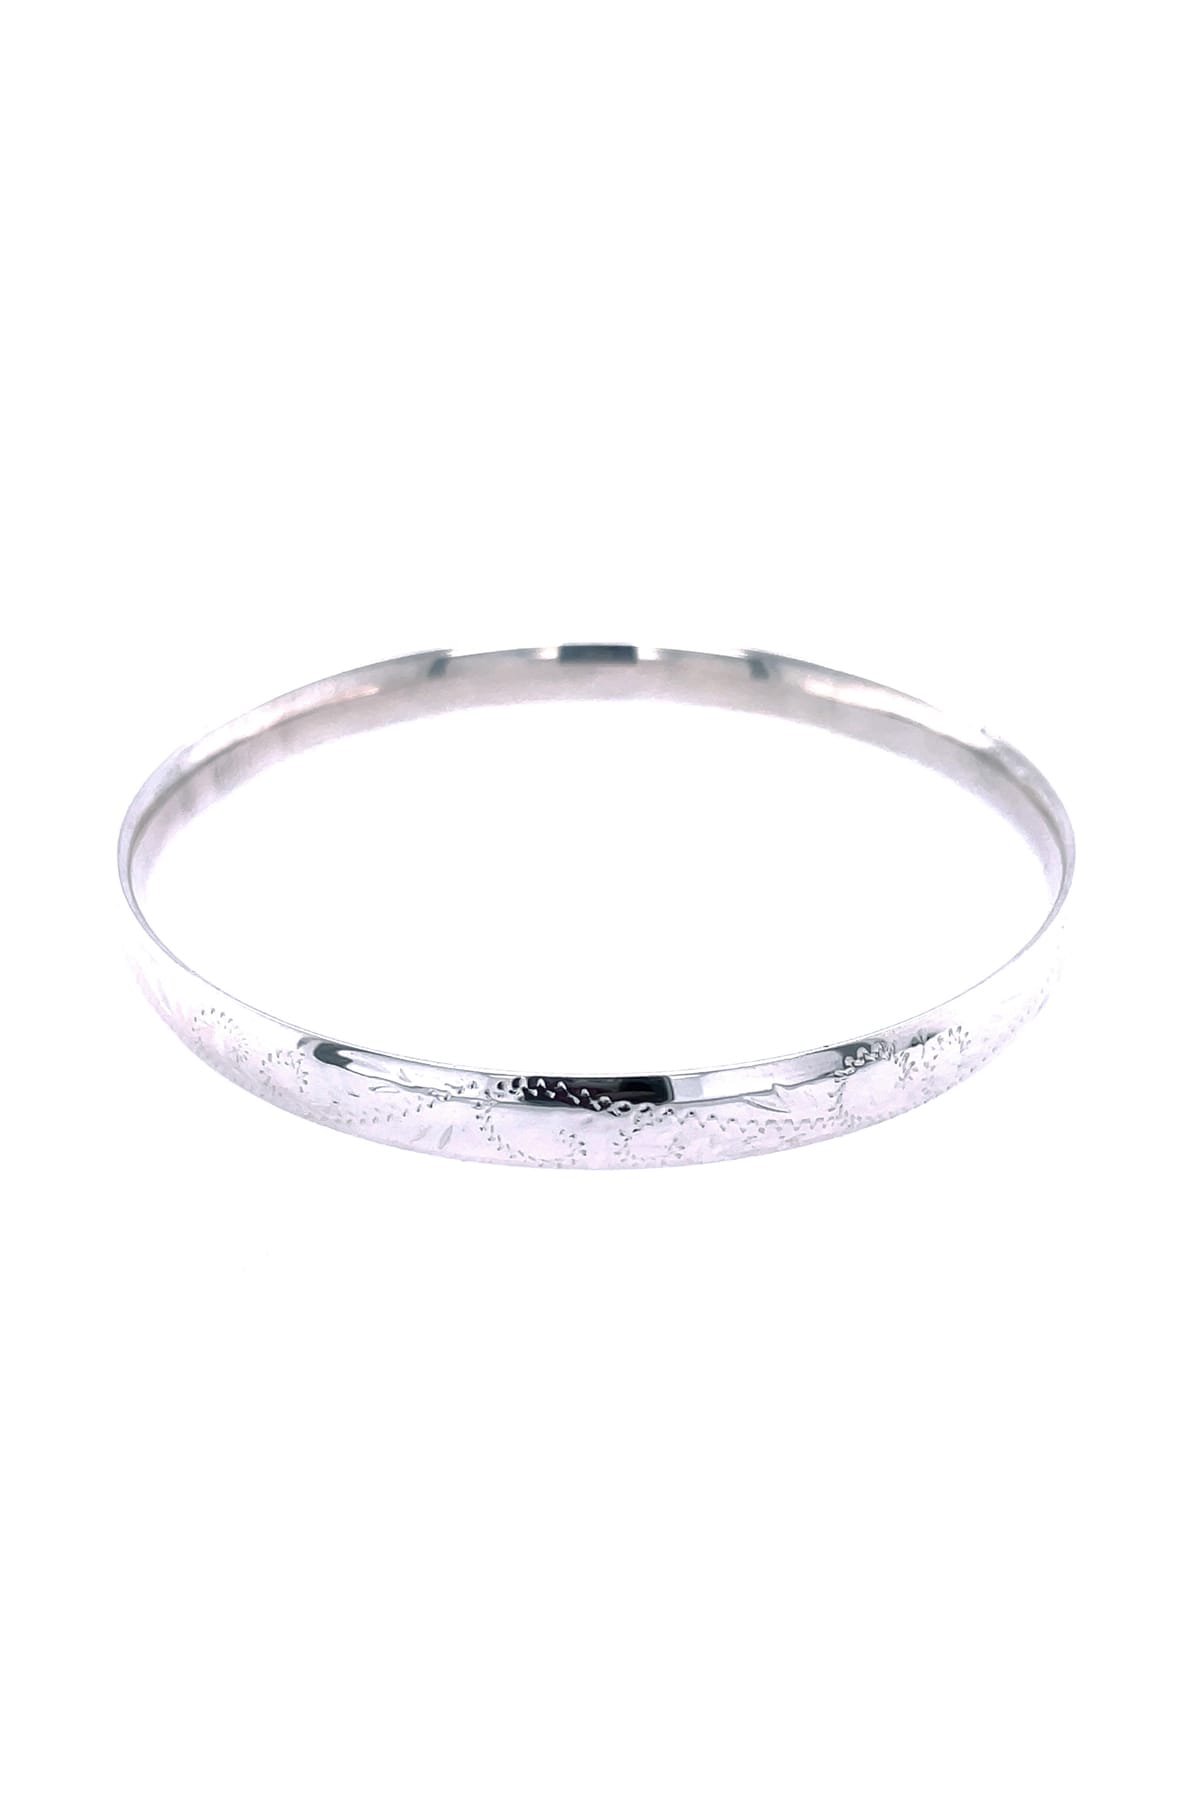 Solid Sterling Silver Hand Engraved Comfort Fit Bangle at LeGassick Jewellers Gold Coast, Australia